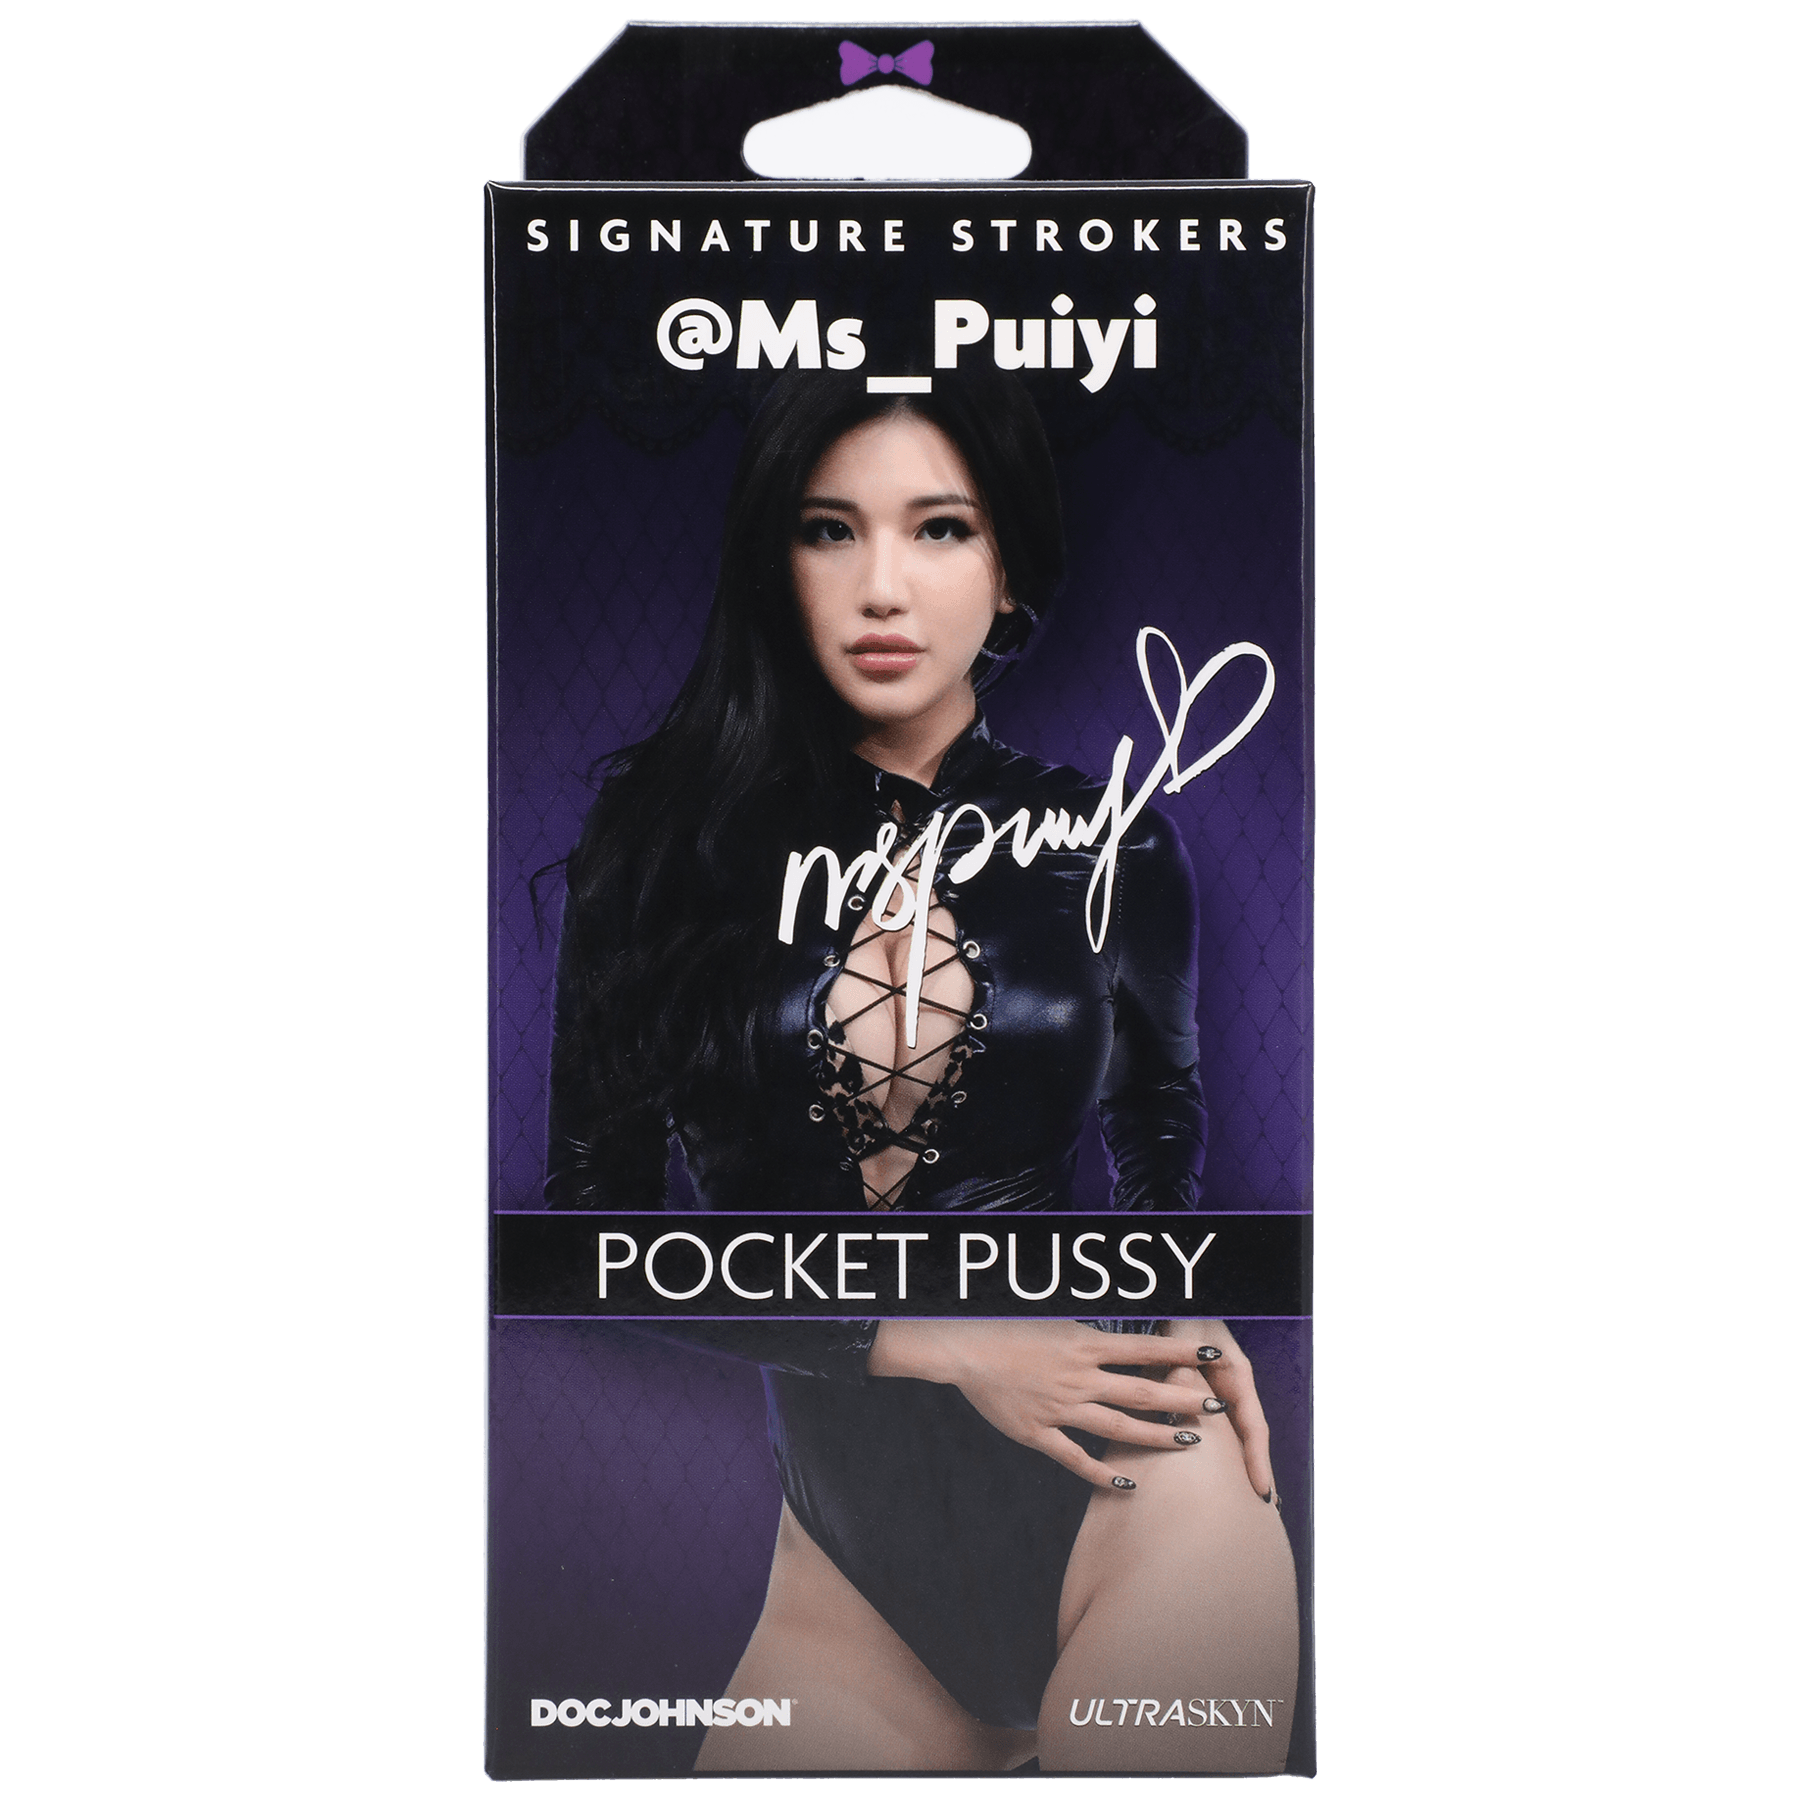 Signature Strokers @Ms_Puiyi - Buy At Luxury Toy X - Free 3-Day Shipping